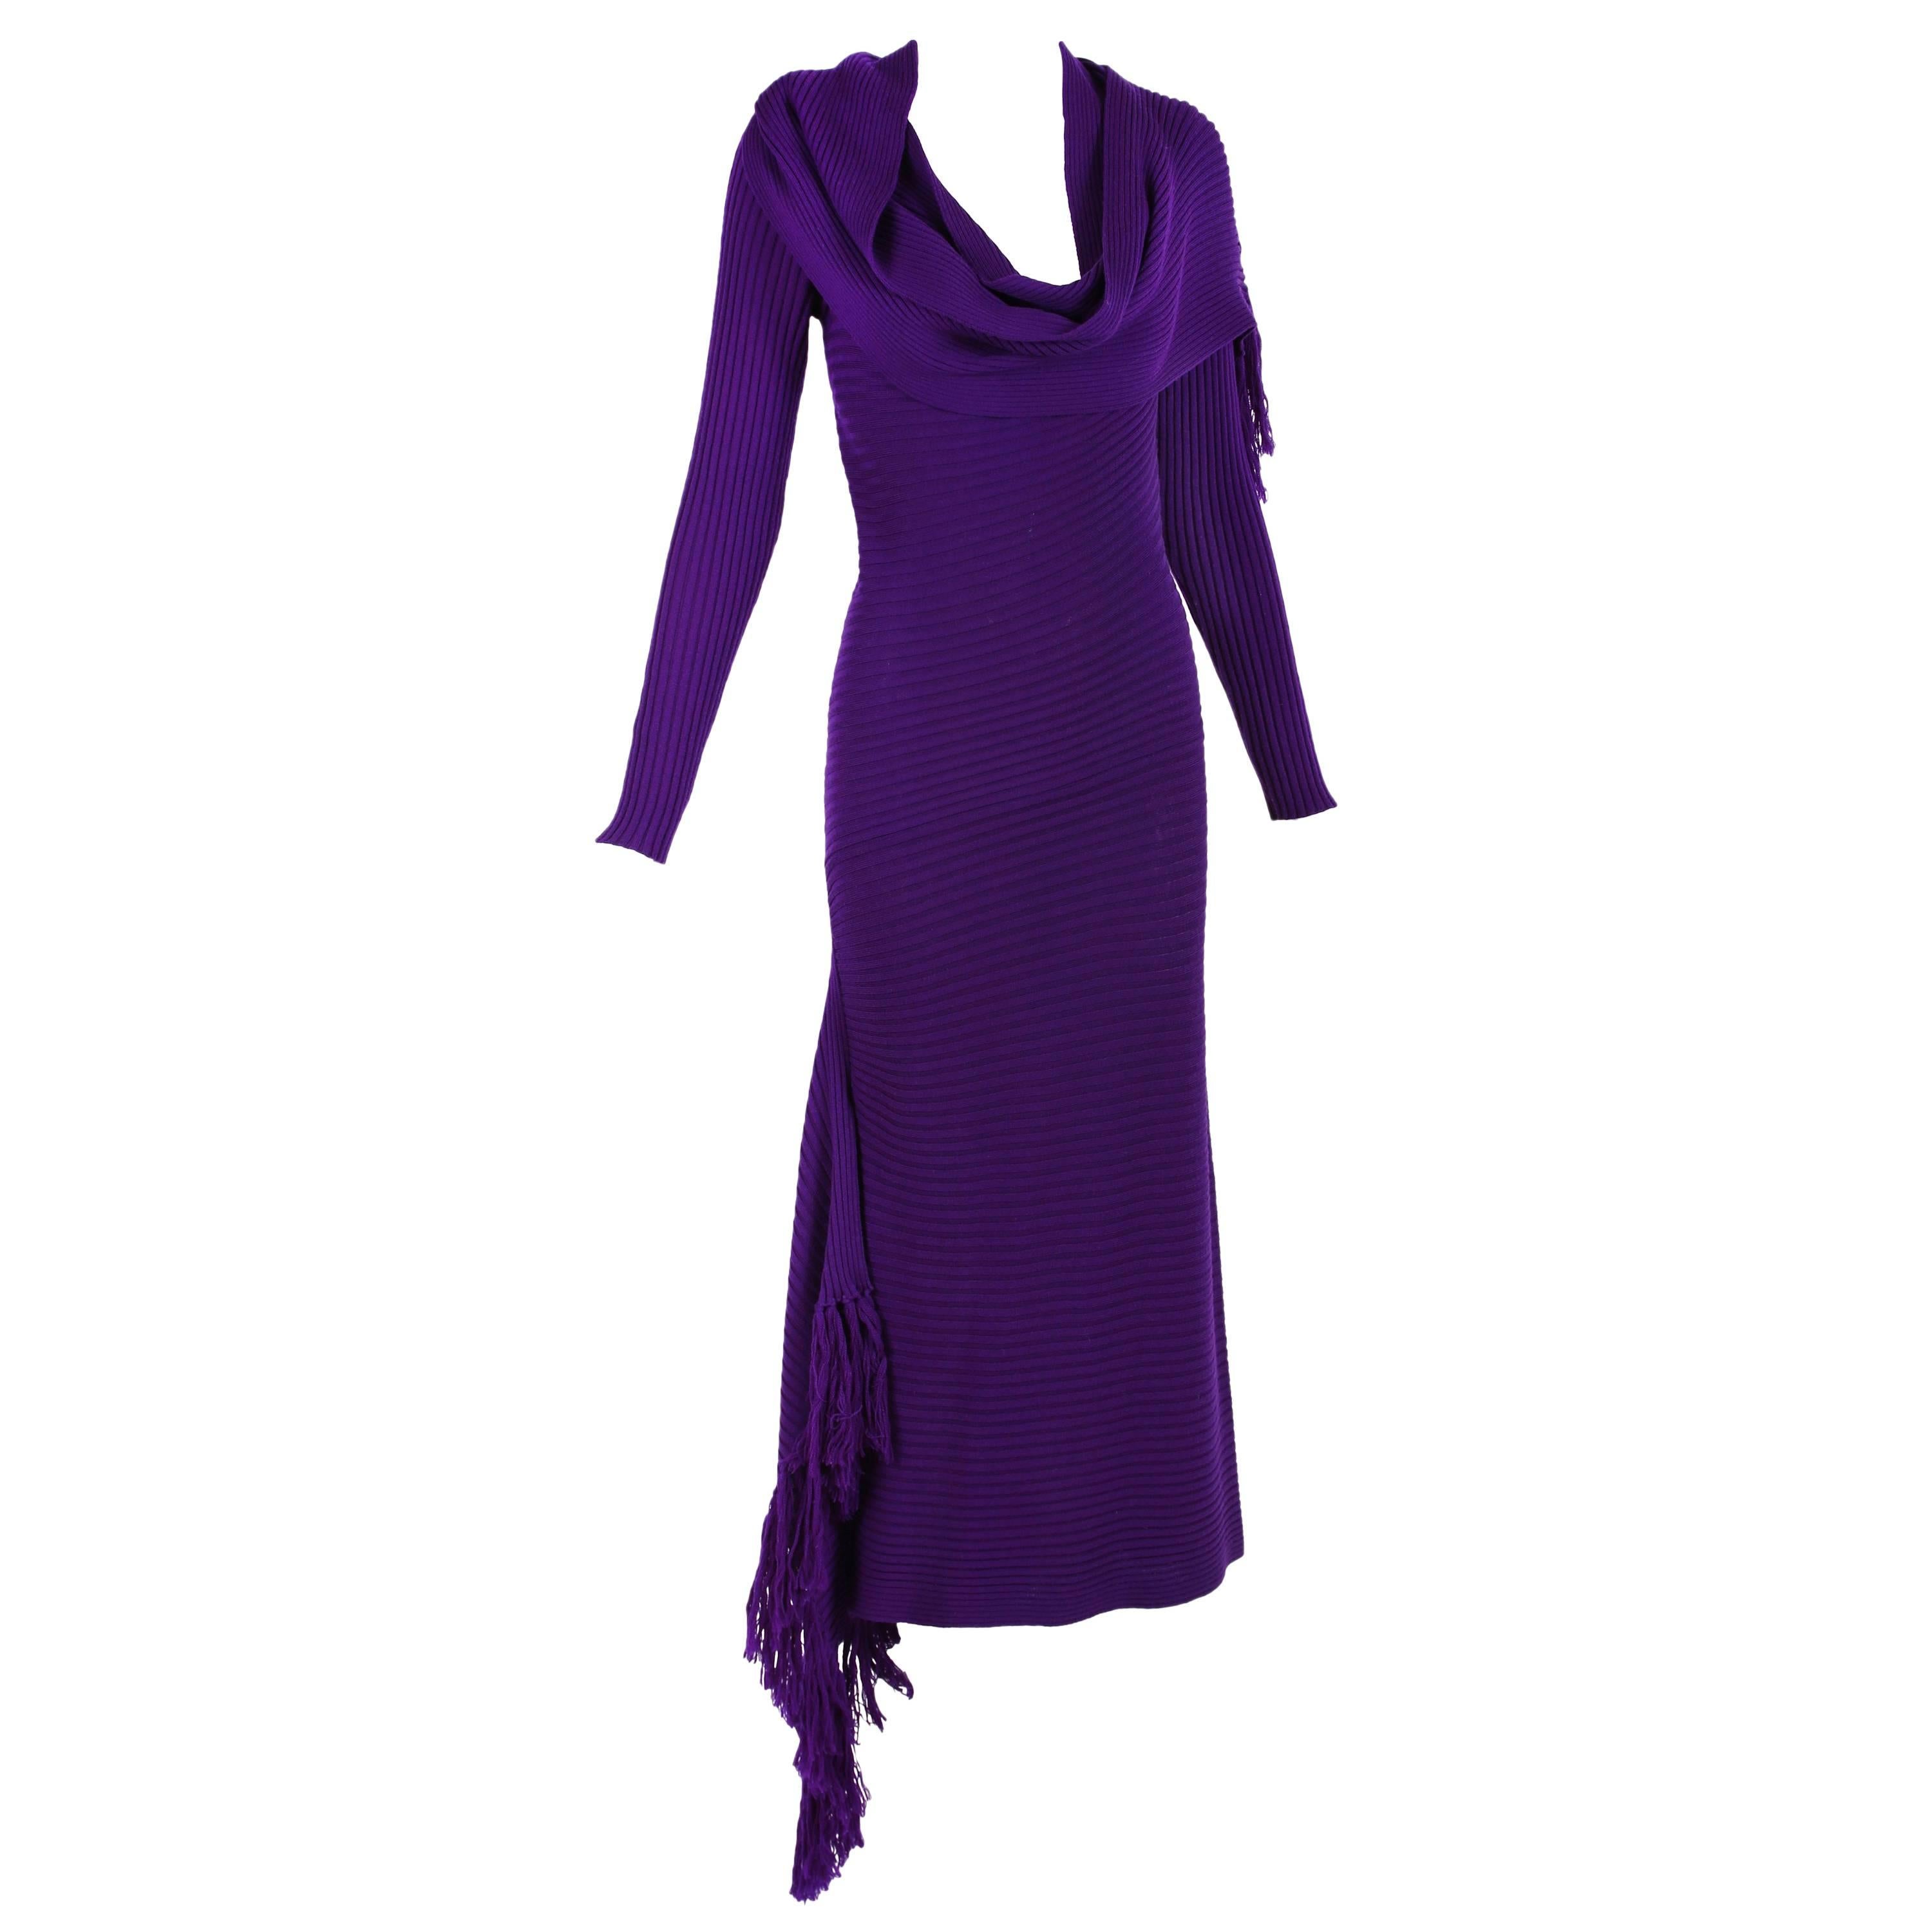 Jean Paul Gaultier Deep Purple Bodycon Dress with Fringed Scarf and Side Slit